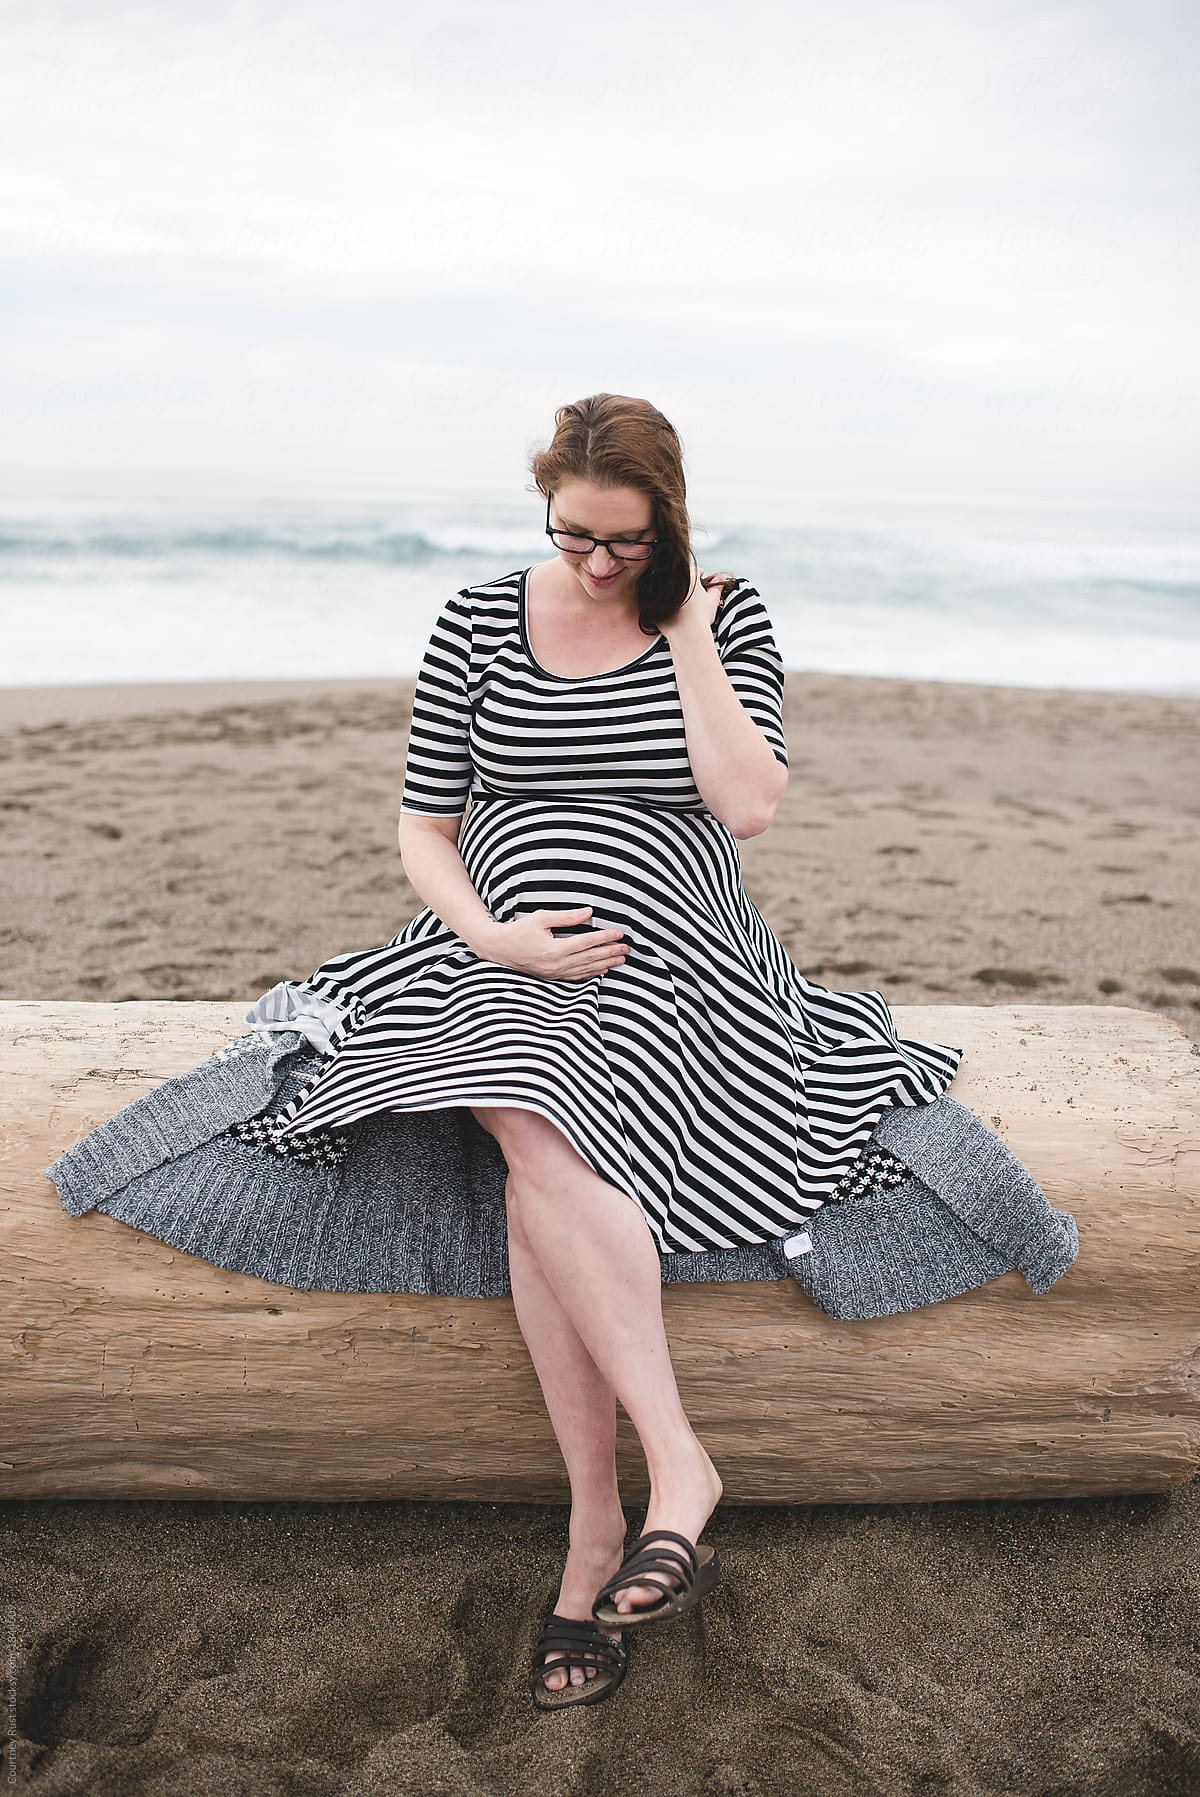 Portrait of a pregnant woman on the beach by Courtney Rust - Maternity